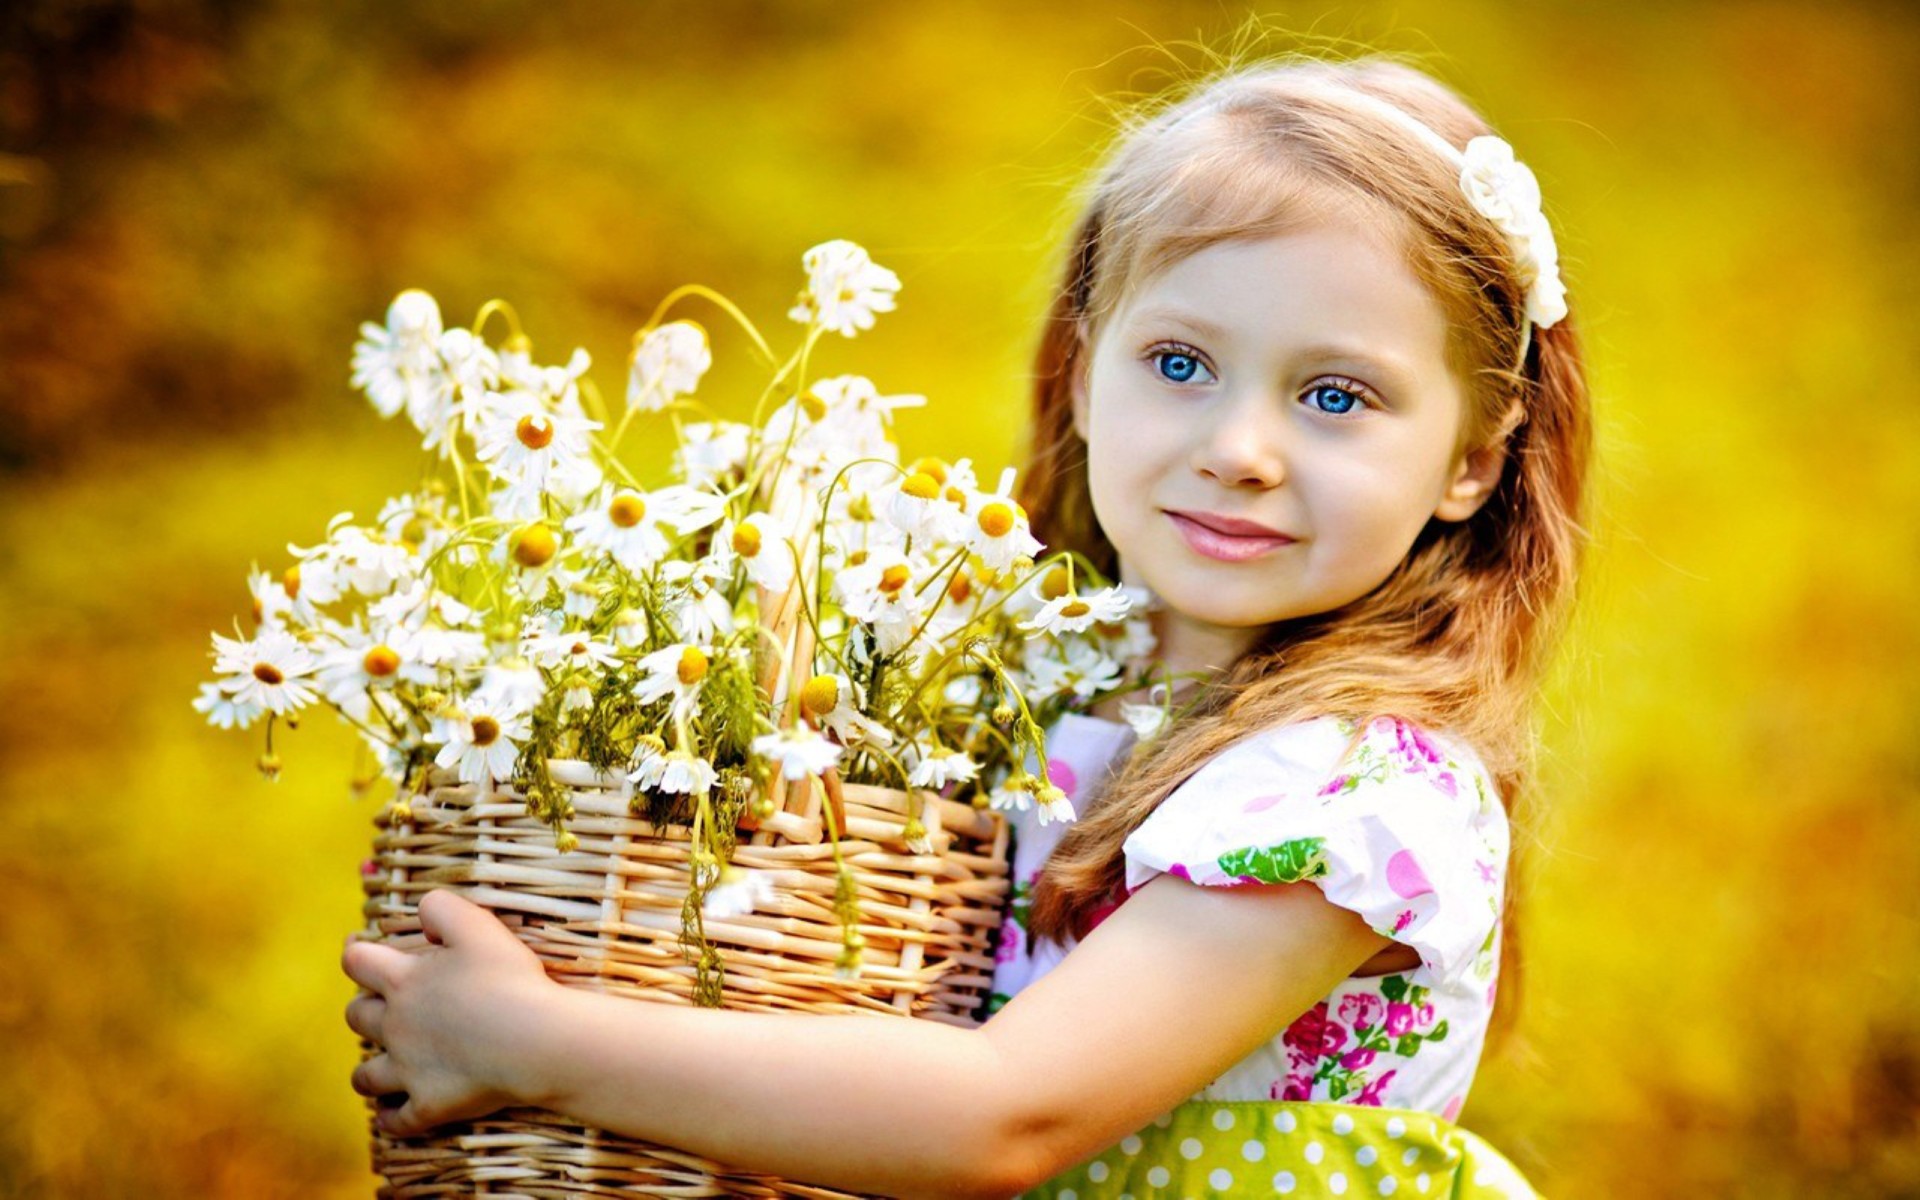 HQFX Wallpapers: Girls With Flowers Images For Desktop, Free ...